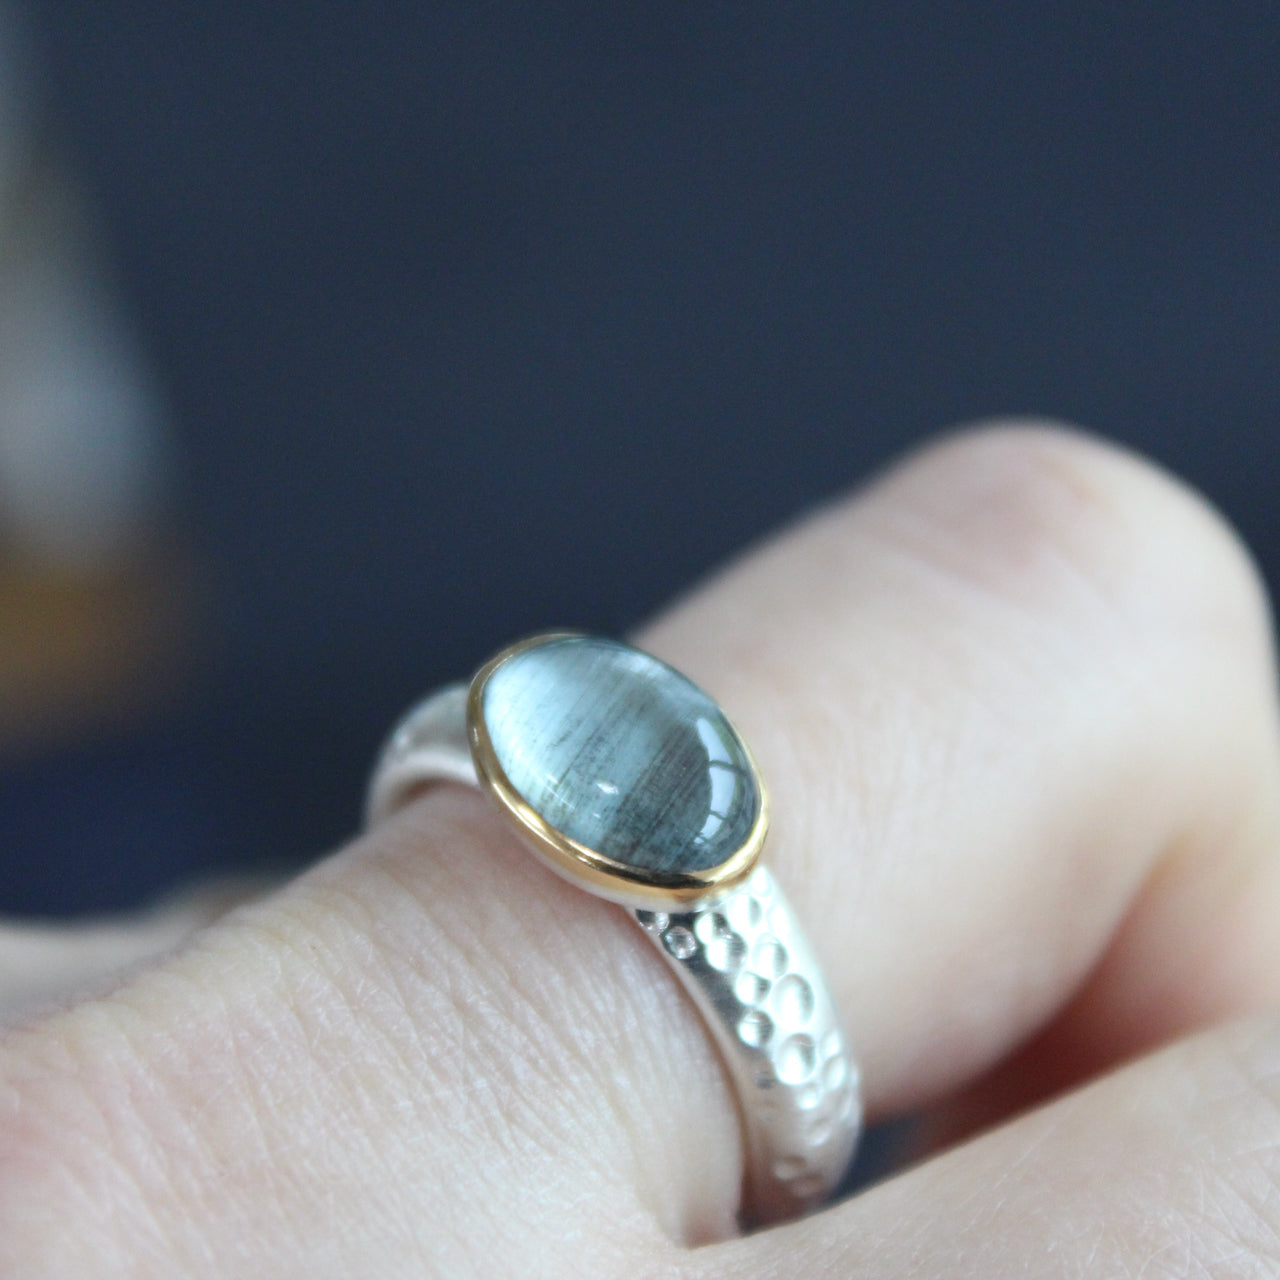 Moss aquamarine (oval) set in gold on textured ring in brushed silver by Carin Lindberg on finger